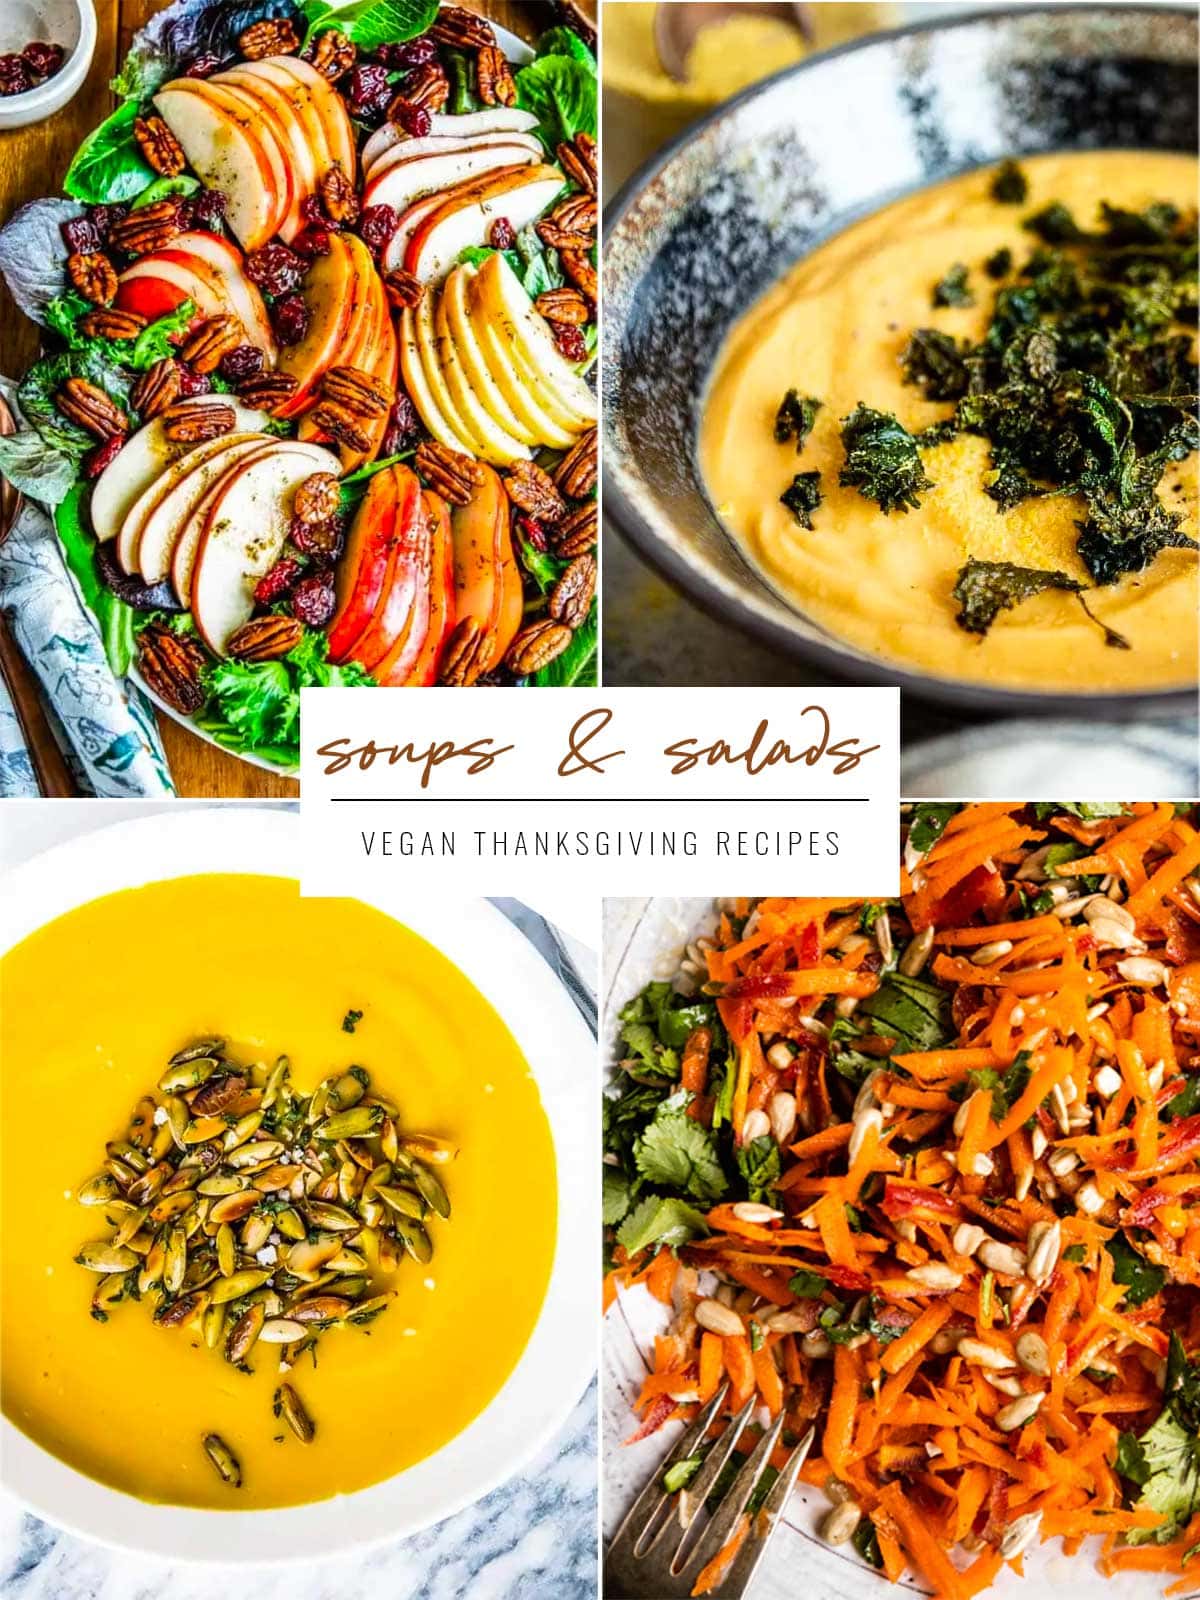 4 images with words soups and salads for Vegan Thanksgiving written on top. Images include fall salad, potato soup, pumpkin soup and carrot salad